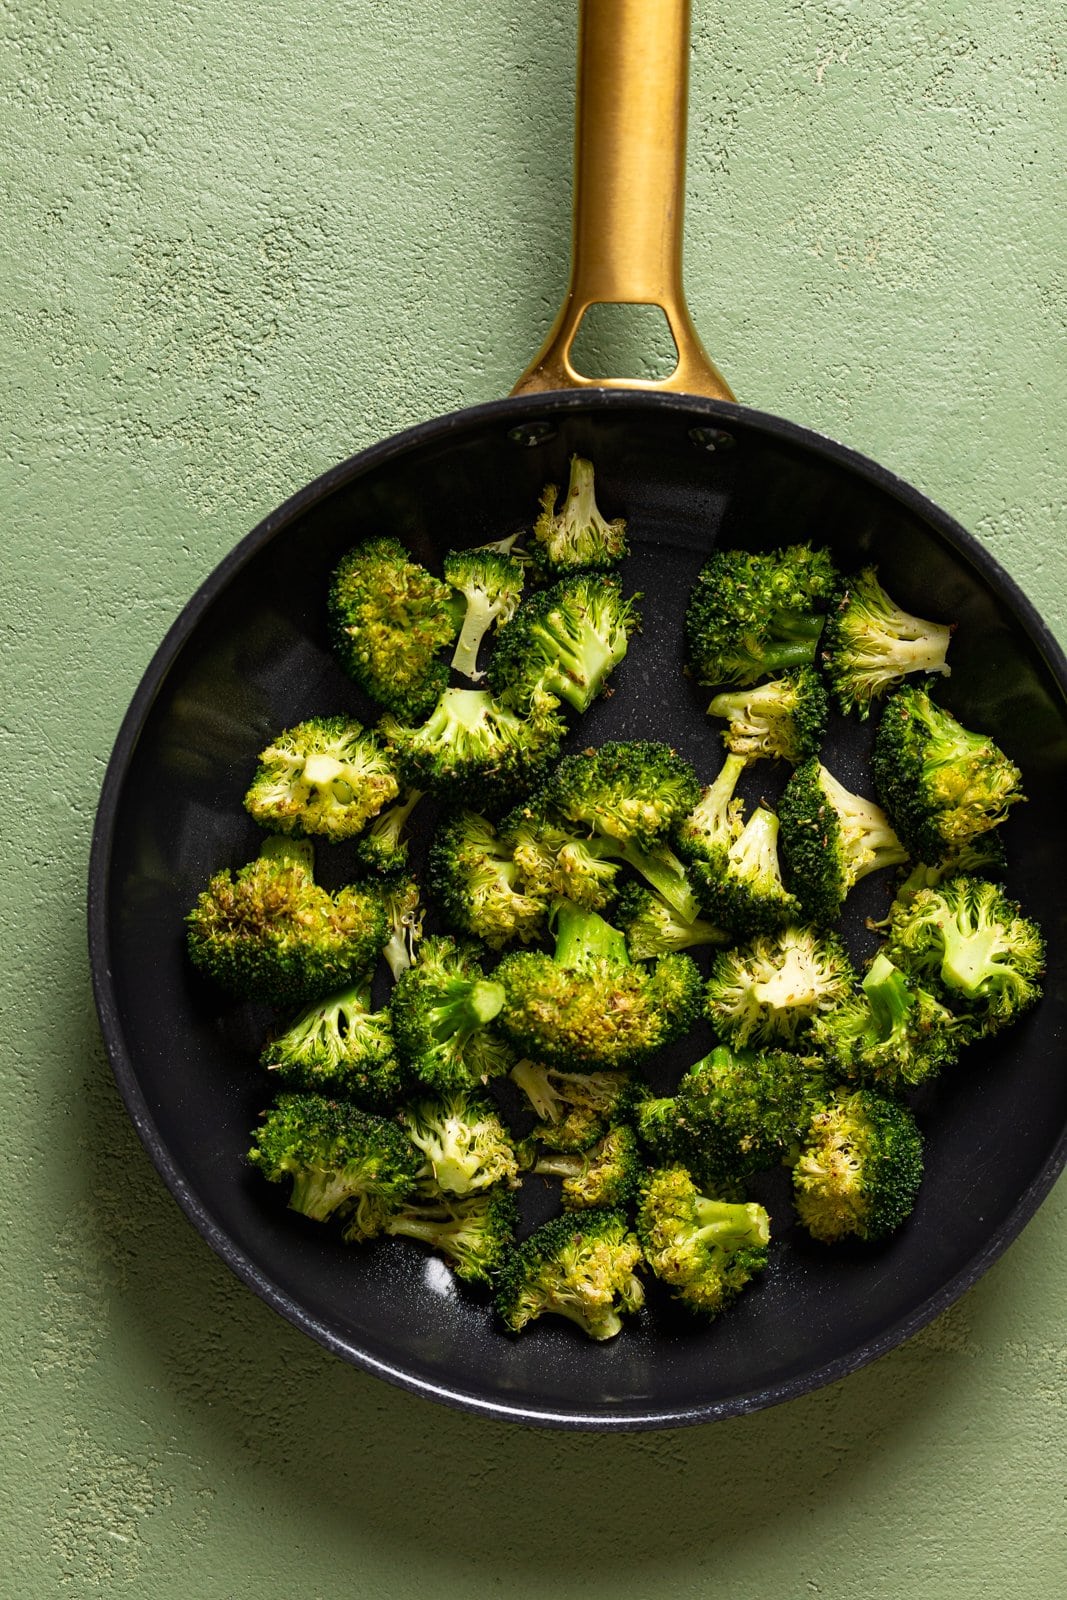 Chopped broccoli in a skillet